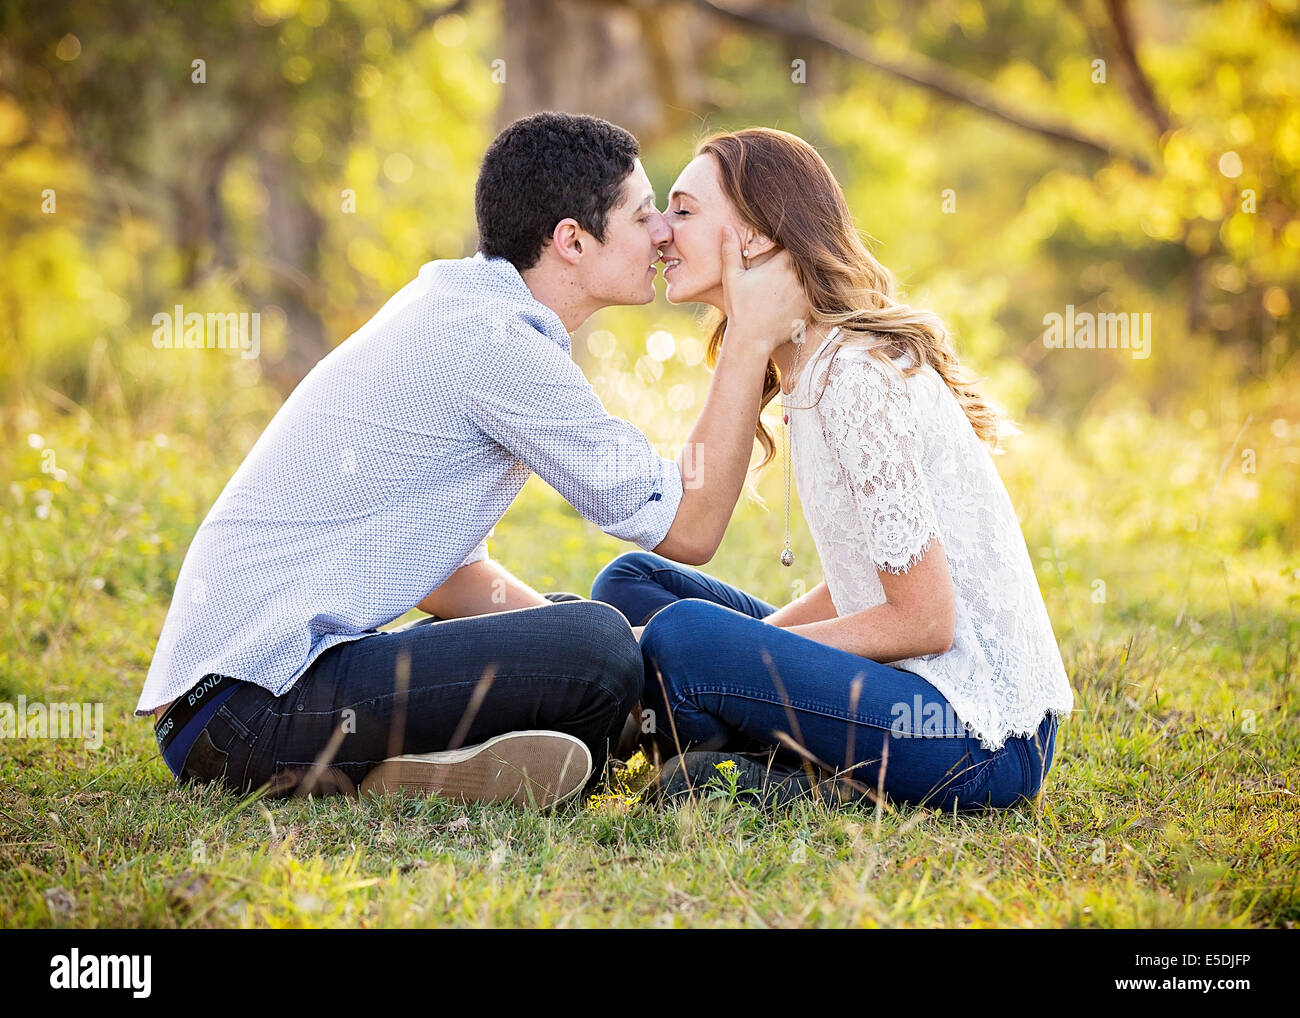 a young couple about to kiss Stock Photo